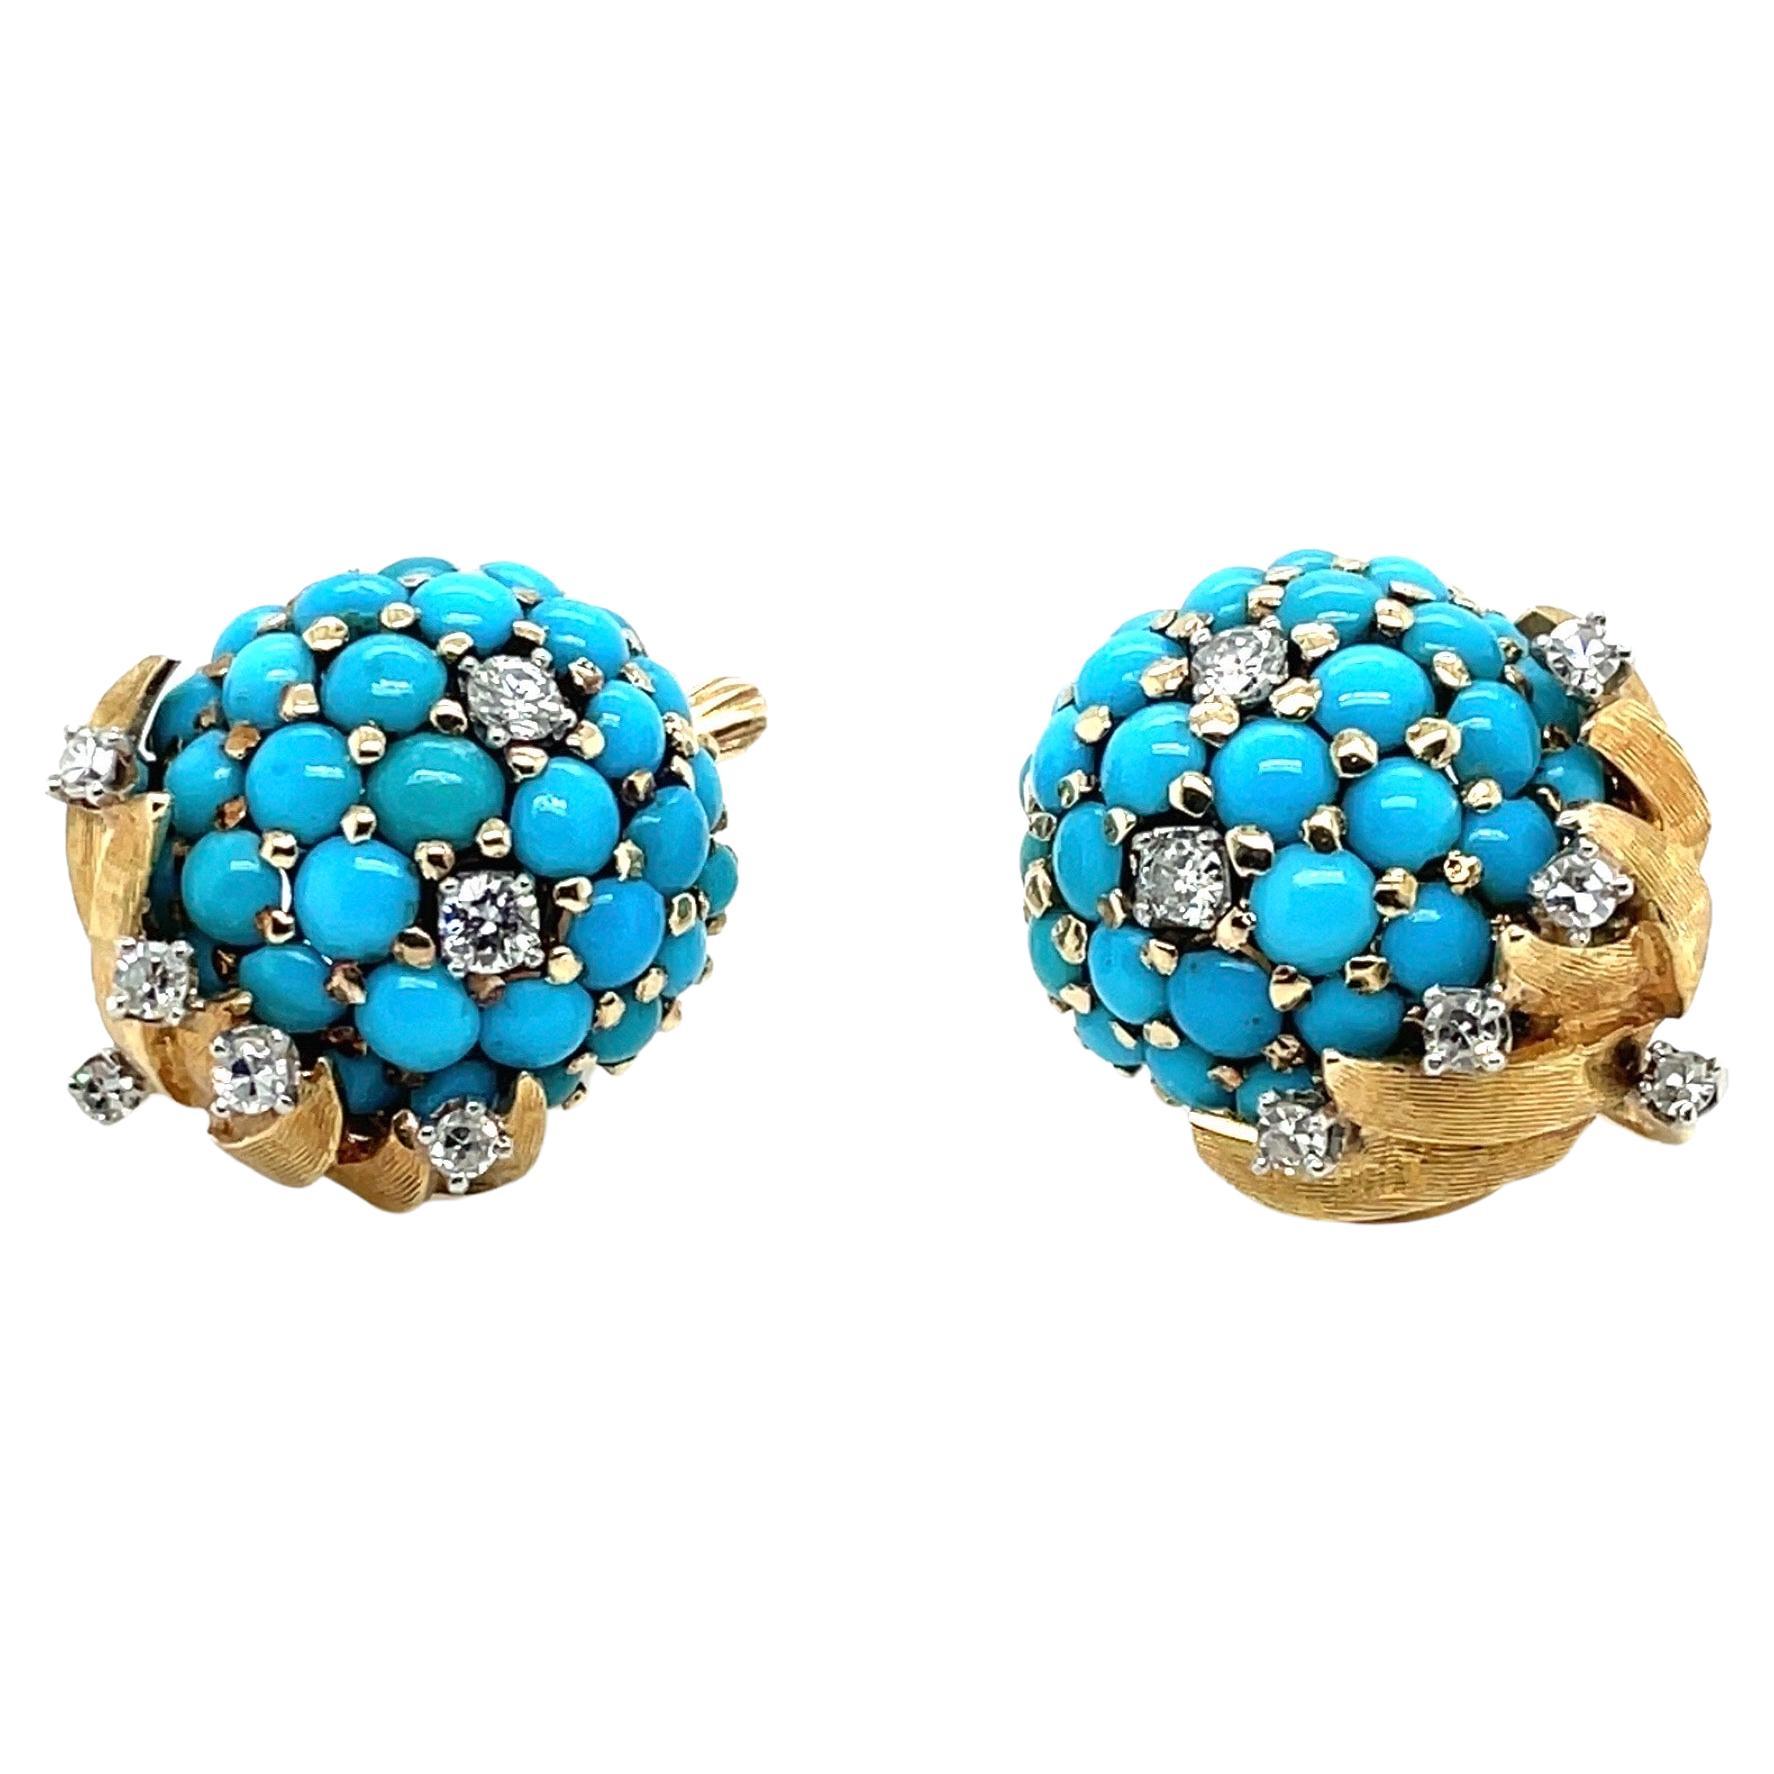 18 Karat Yellow Gold Turquoise and Diamond Earrings by Tiffany & Co., 1950s